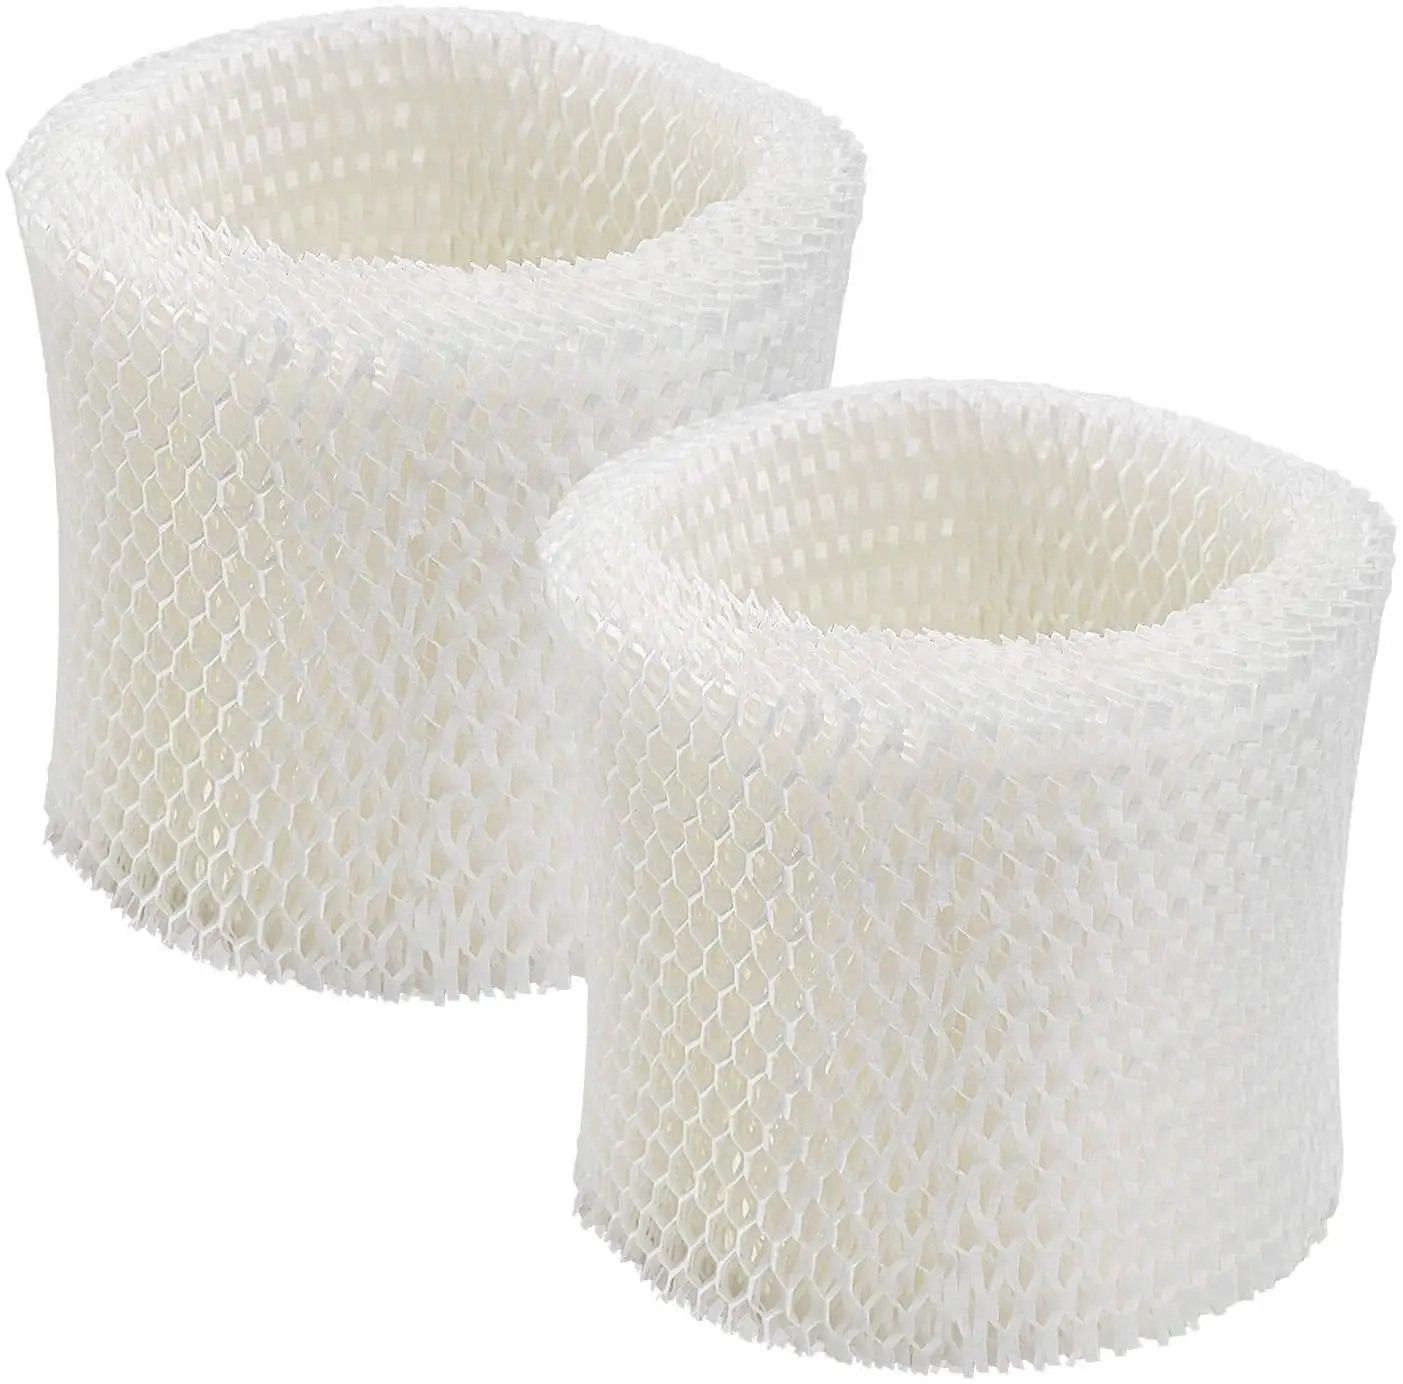 Replacement Wicking Filters For HFT600 Humidifier Filter T For Honeywell HEV615 HEV620